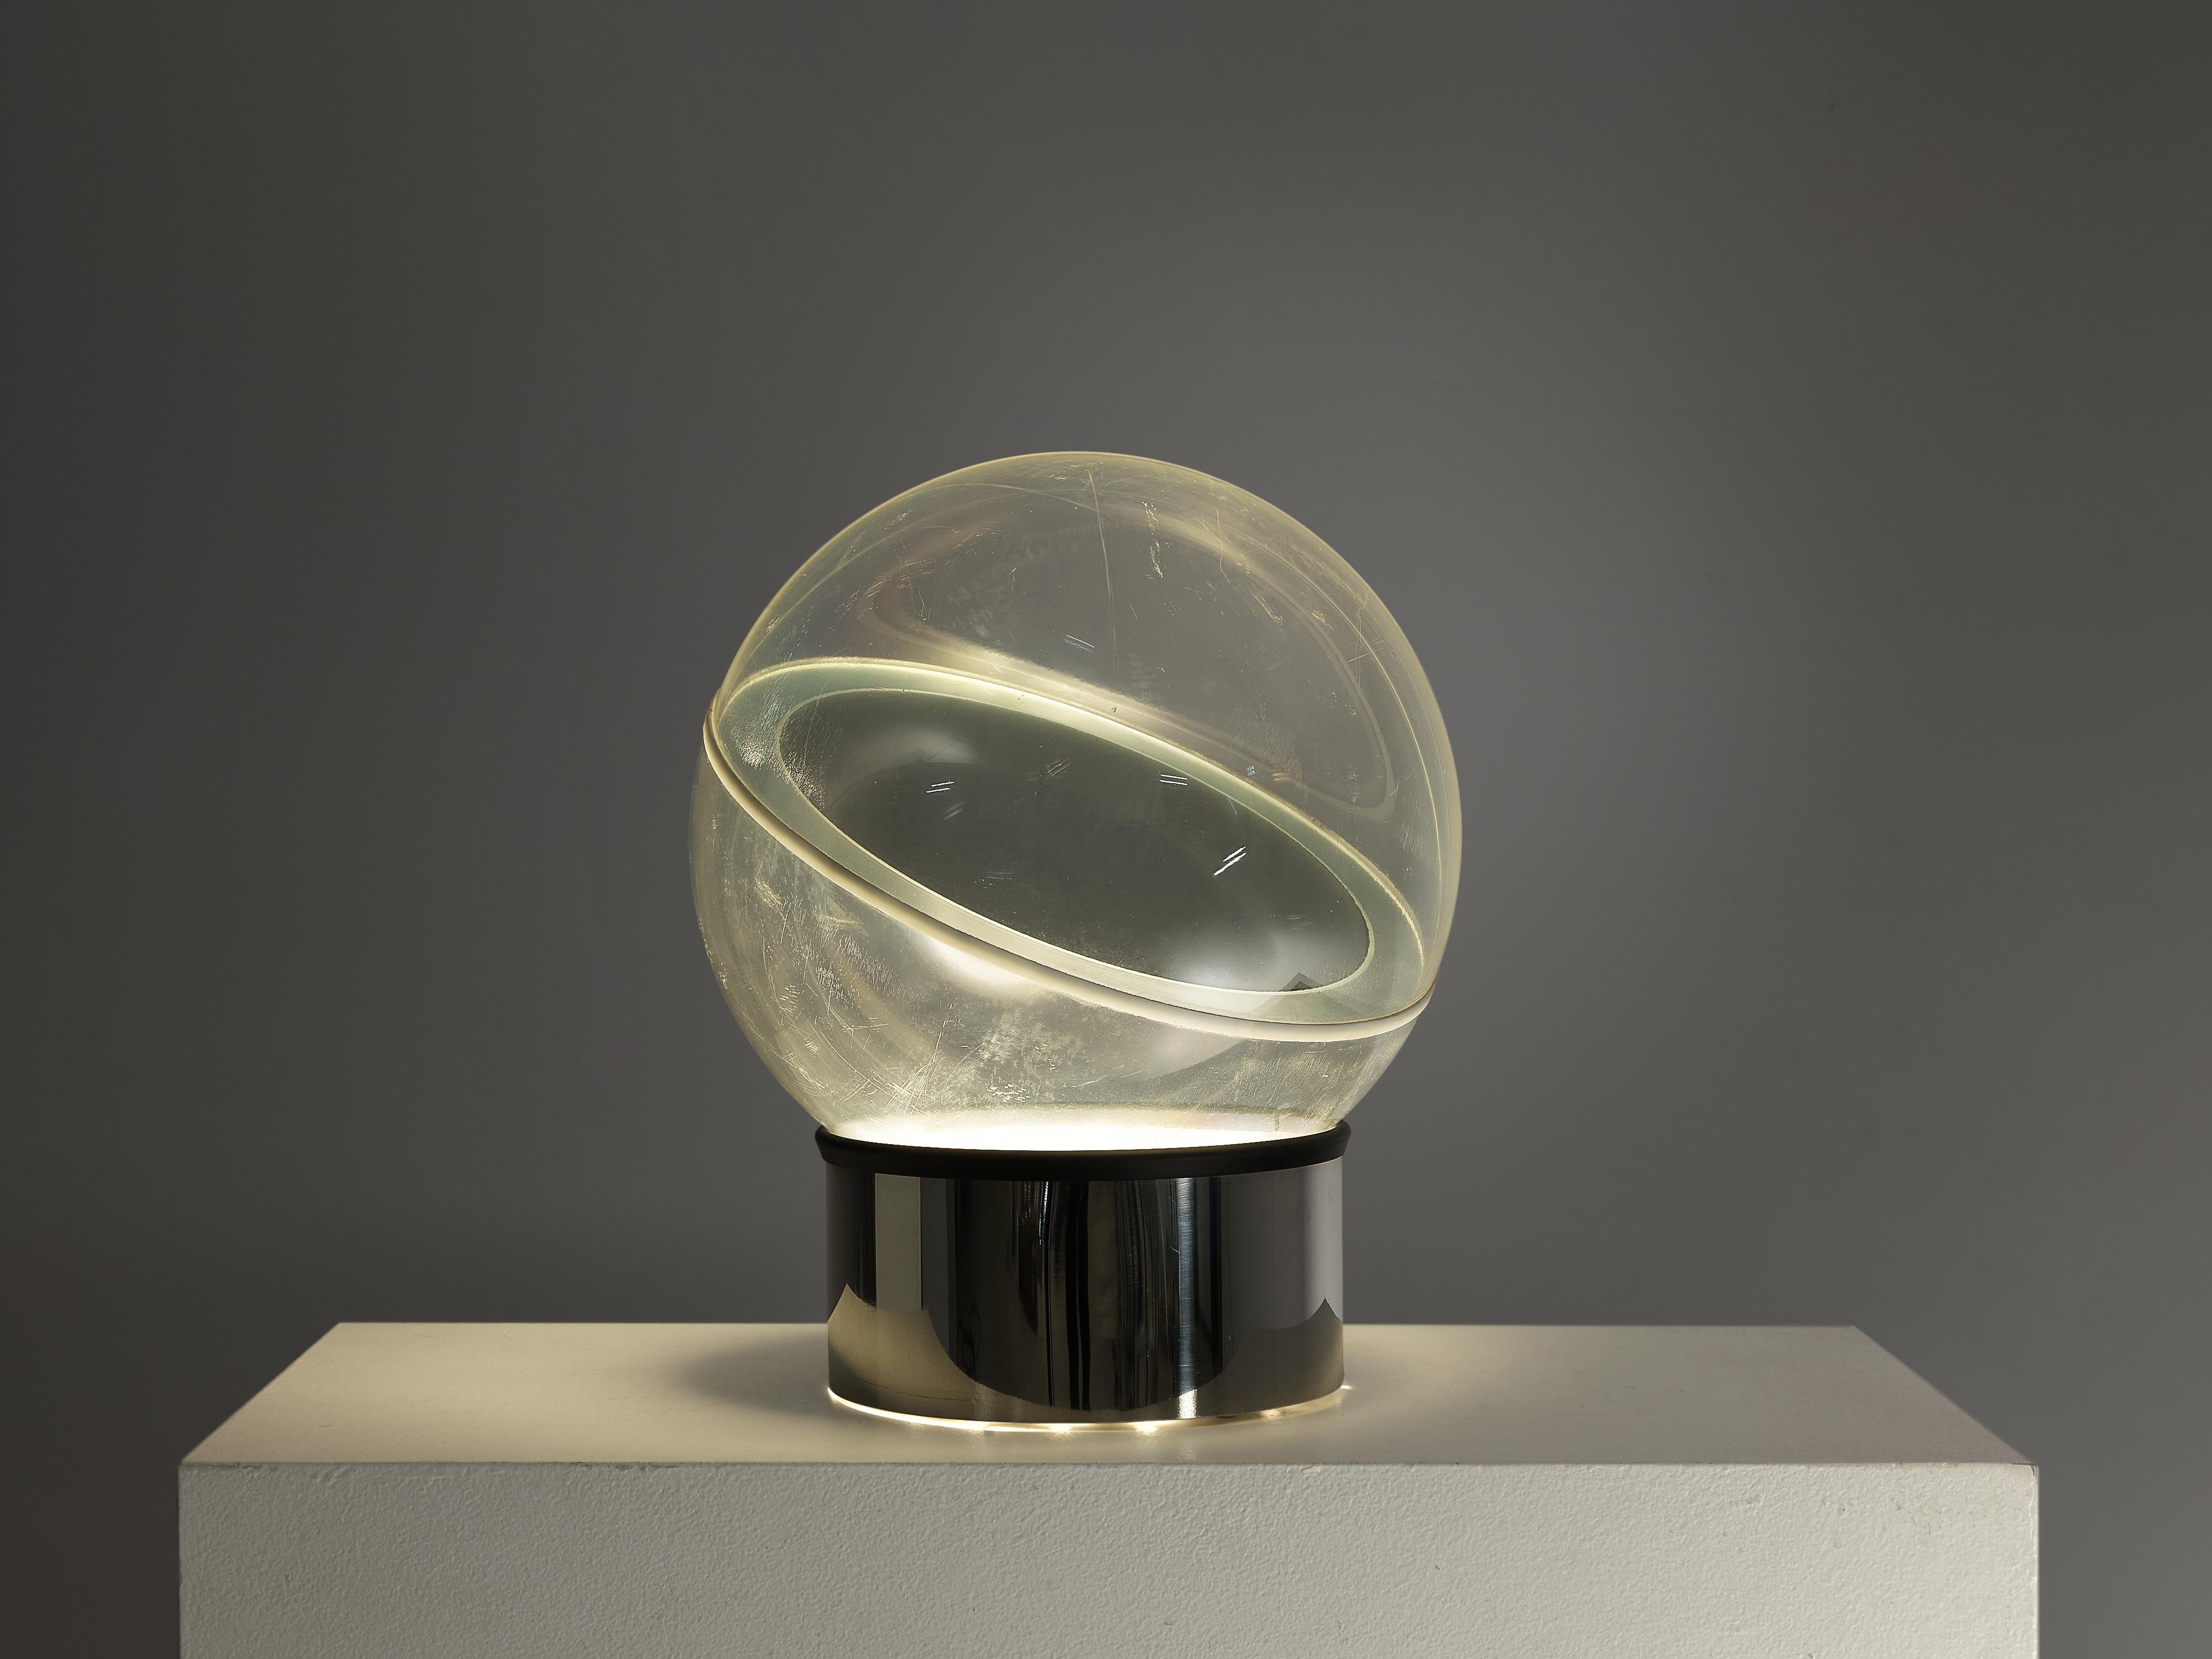 Filippo Panseca for Kartell, table lamp, model '4044', chrome-plated brass, perspex, mirrored glass, neon, Italy, 1968.

Futuristic spherical lamp designed by Italian designer Filippo Panseca for Kartell. Its design is reminiscent to the designs